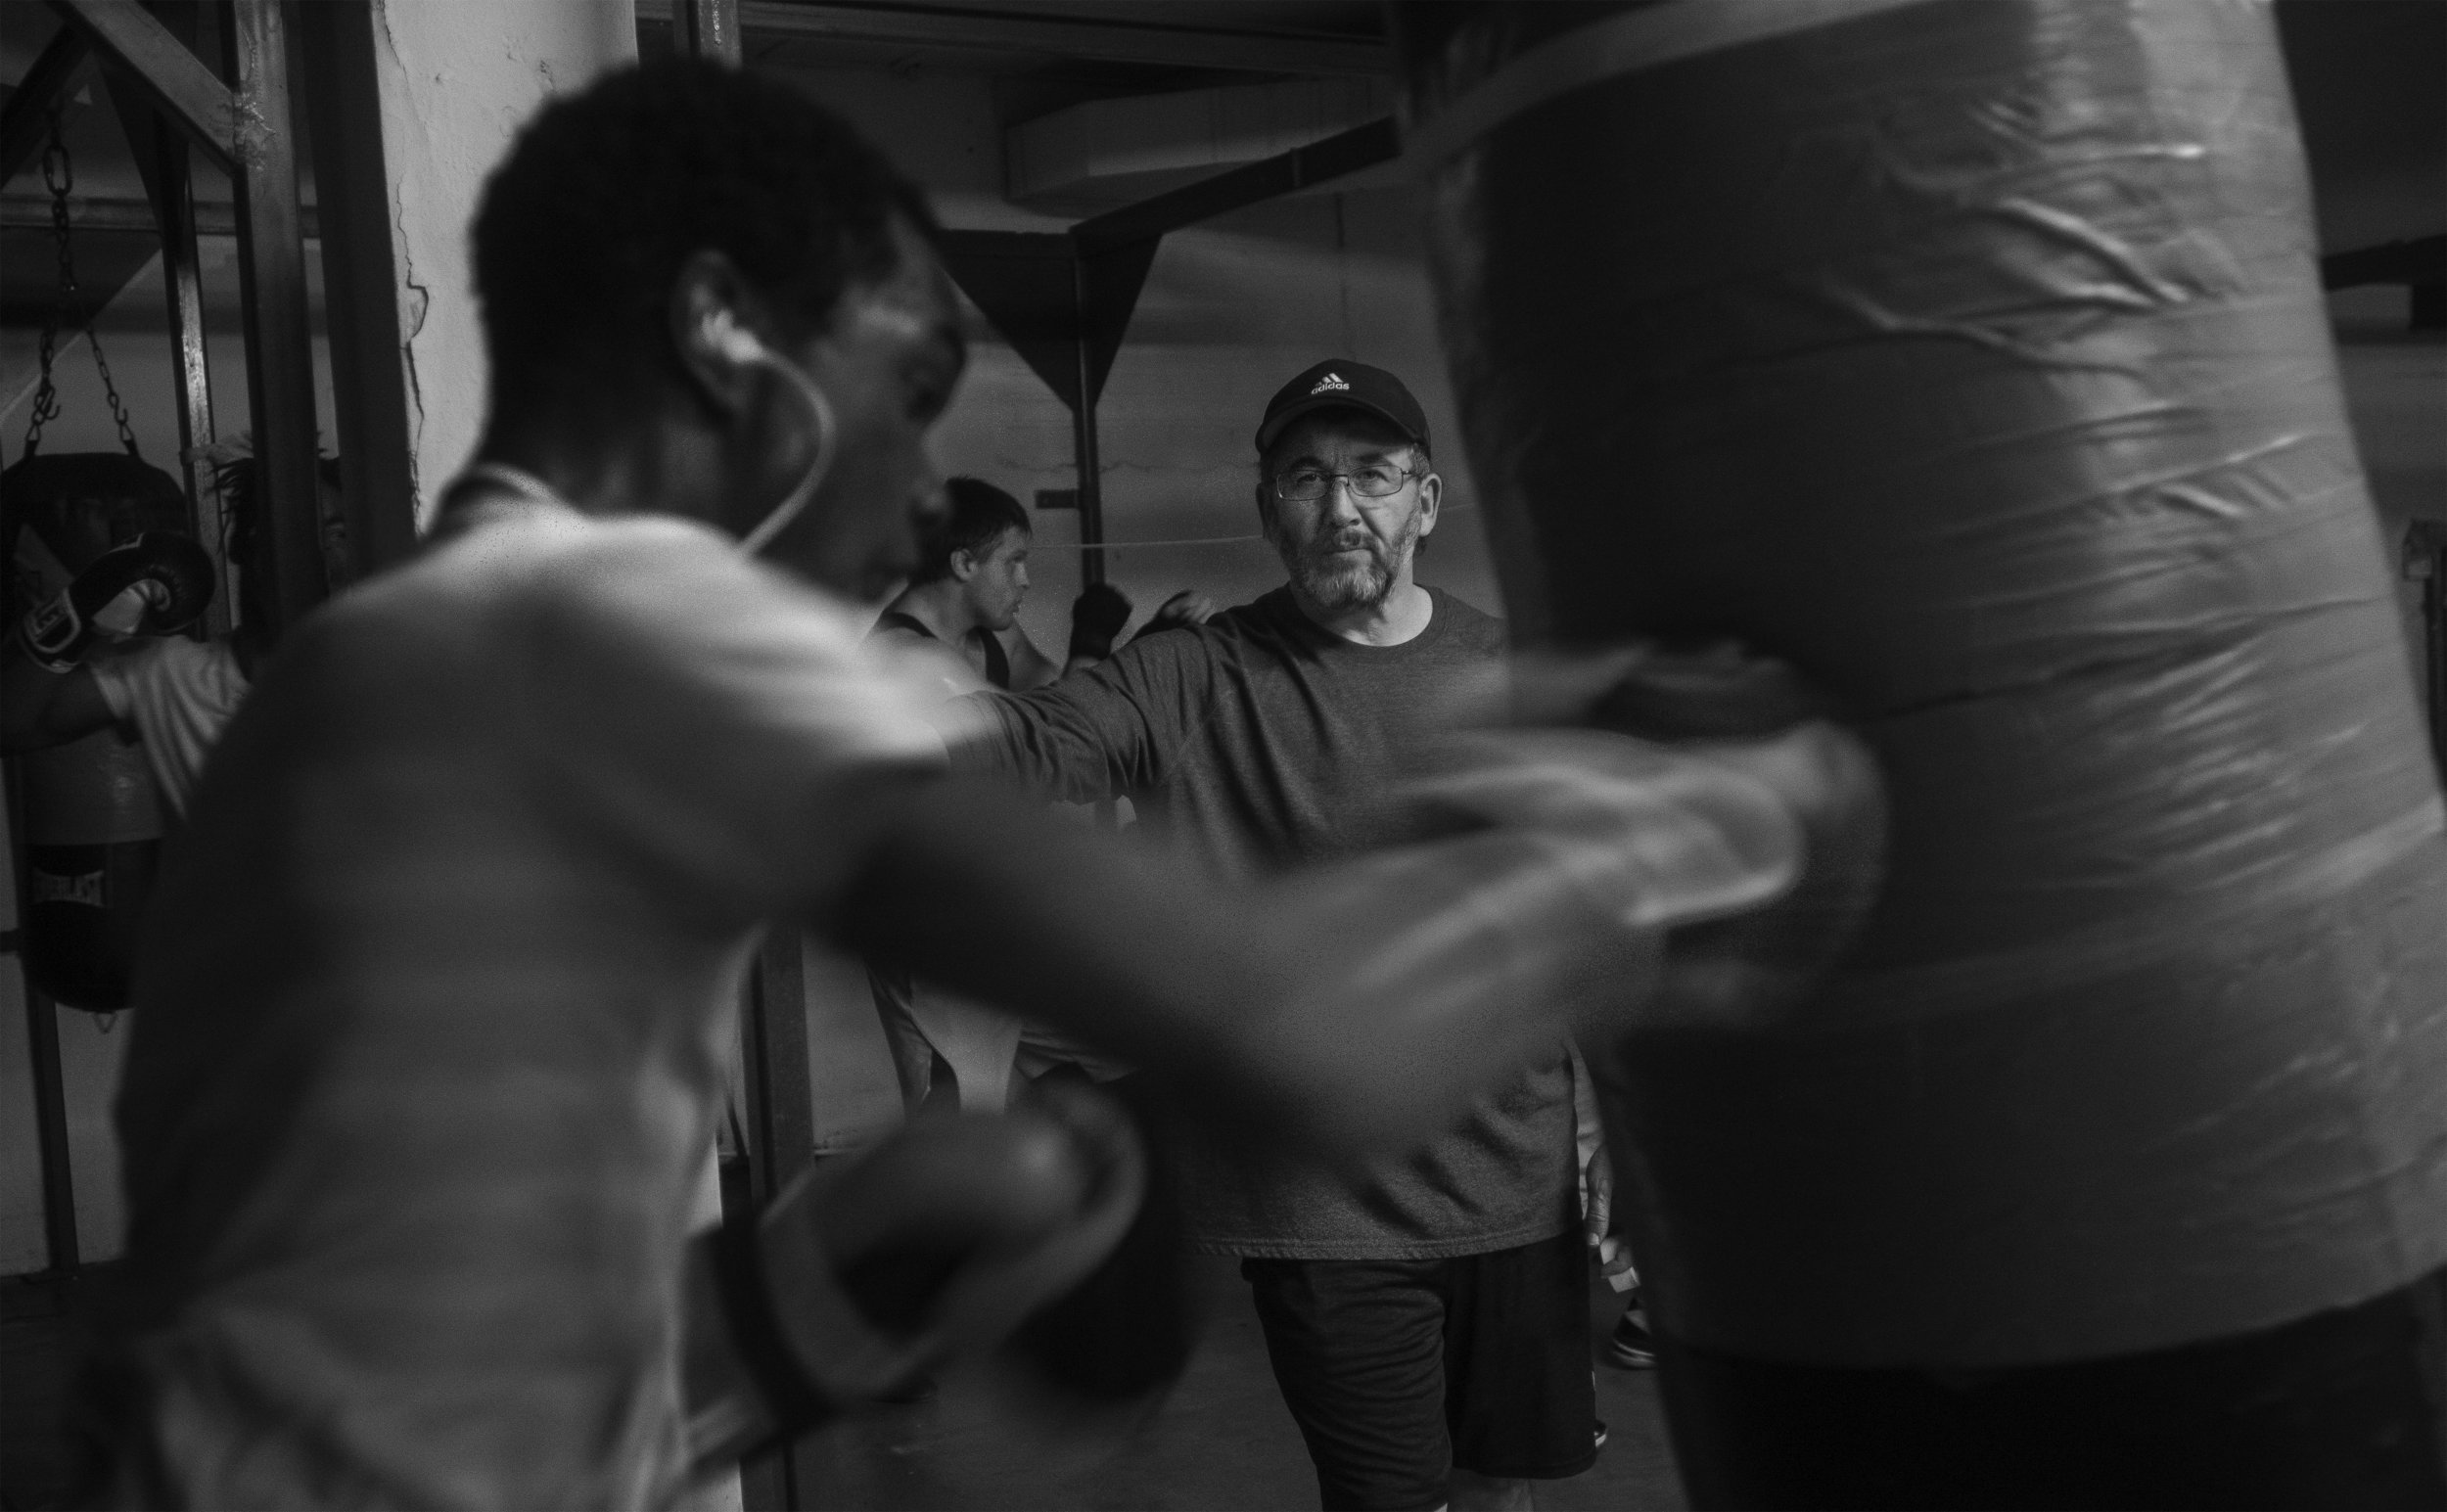  Spikes and his coach, Steve Douthitt, chat between practice rounds in the ring. Douthitt has been working with Spikes to improve his form and technique since he started coming to the gym two years ago. 